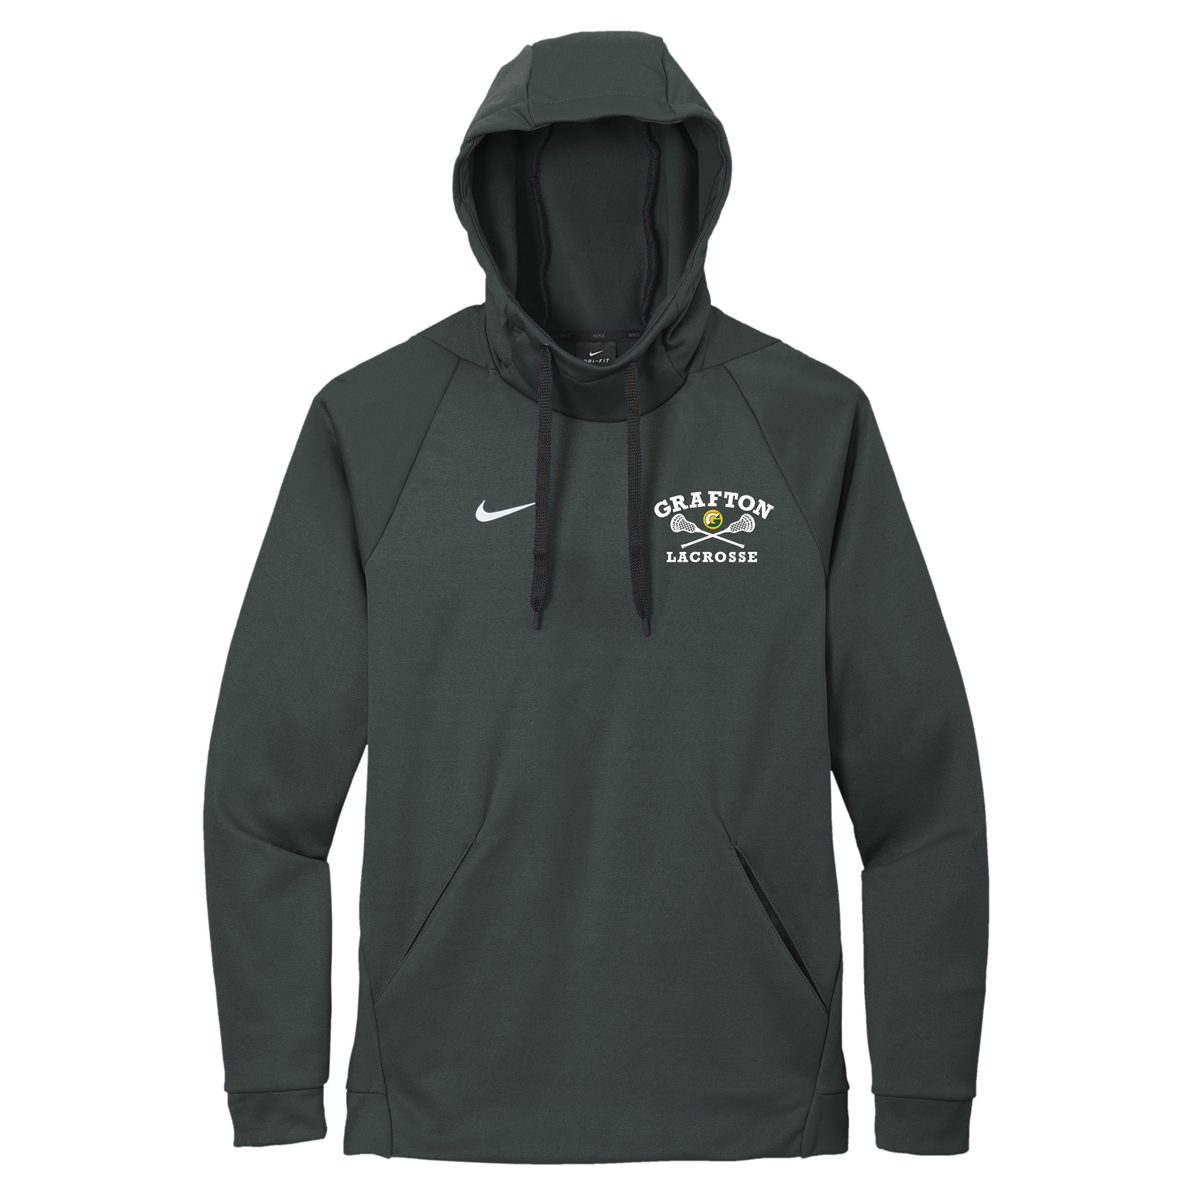 Grafton Lacrosse Nike Therma-FIT Embroidered Hoodie